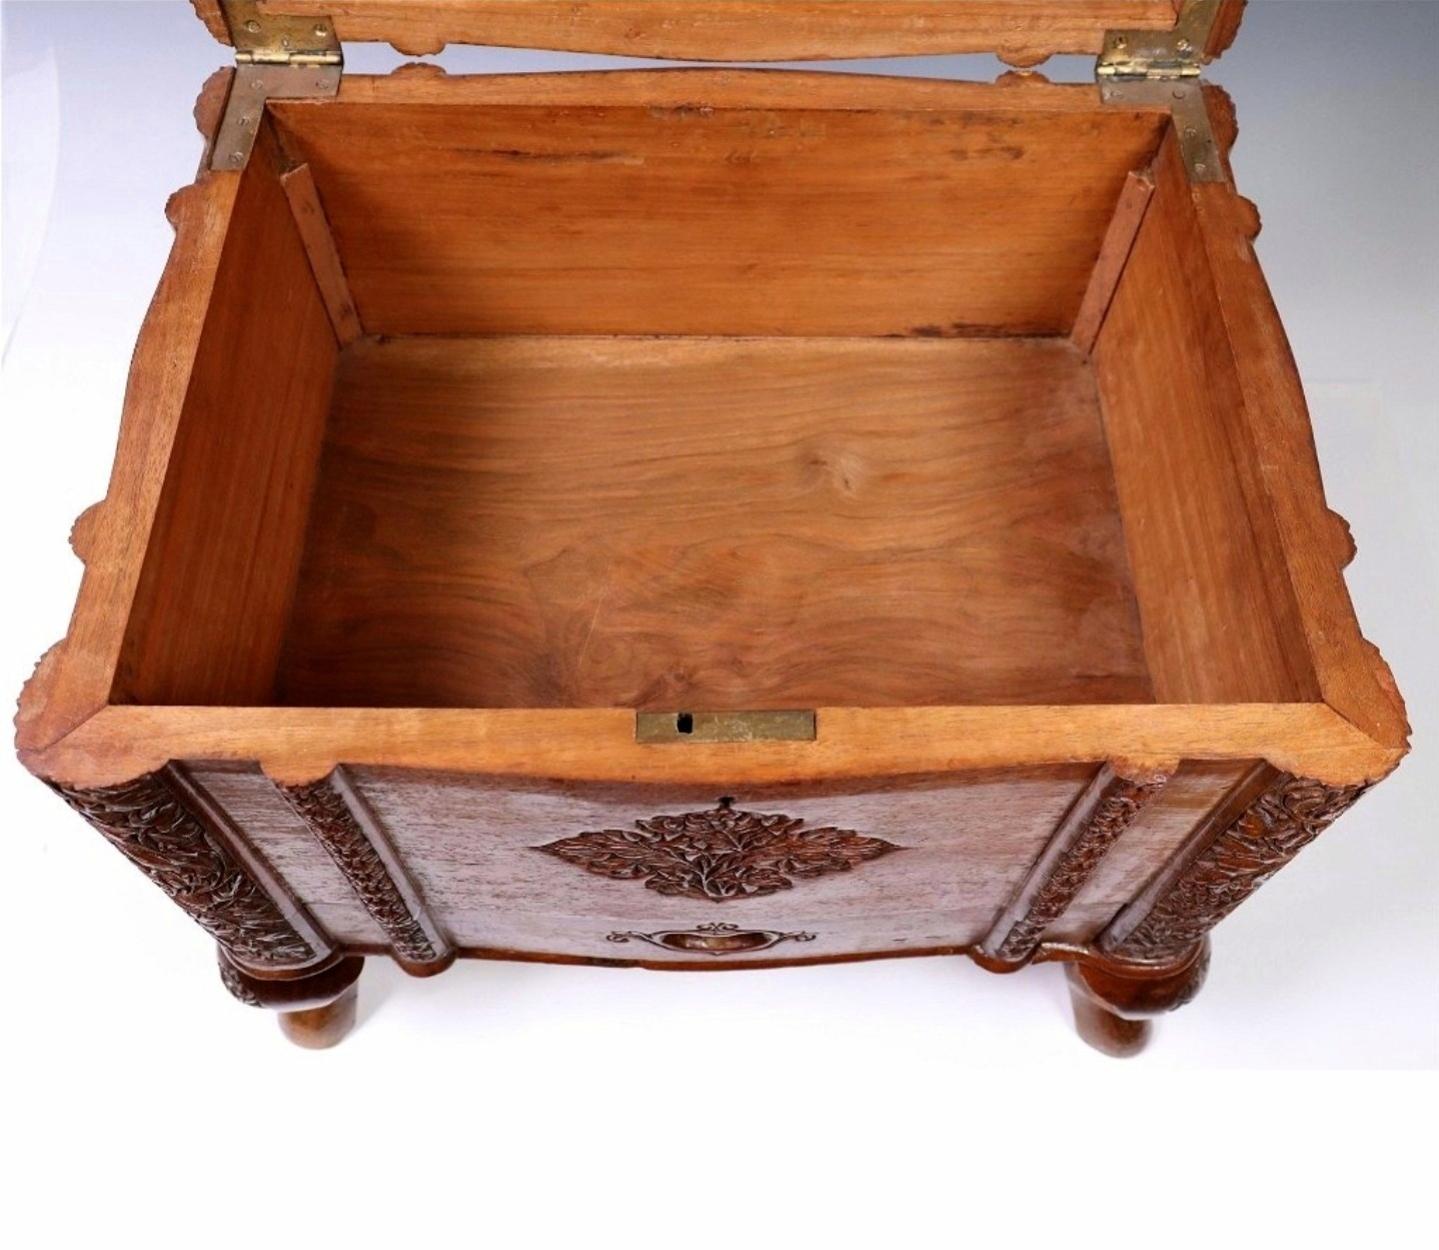 Antique South Asian Colonial Carved Camphor Wood Table Box / Jewelry Casket For Sale 2